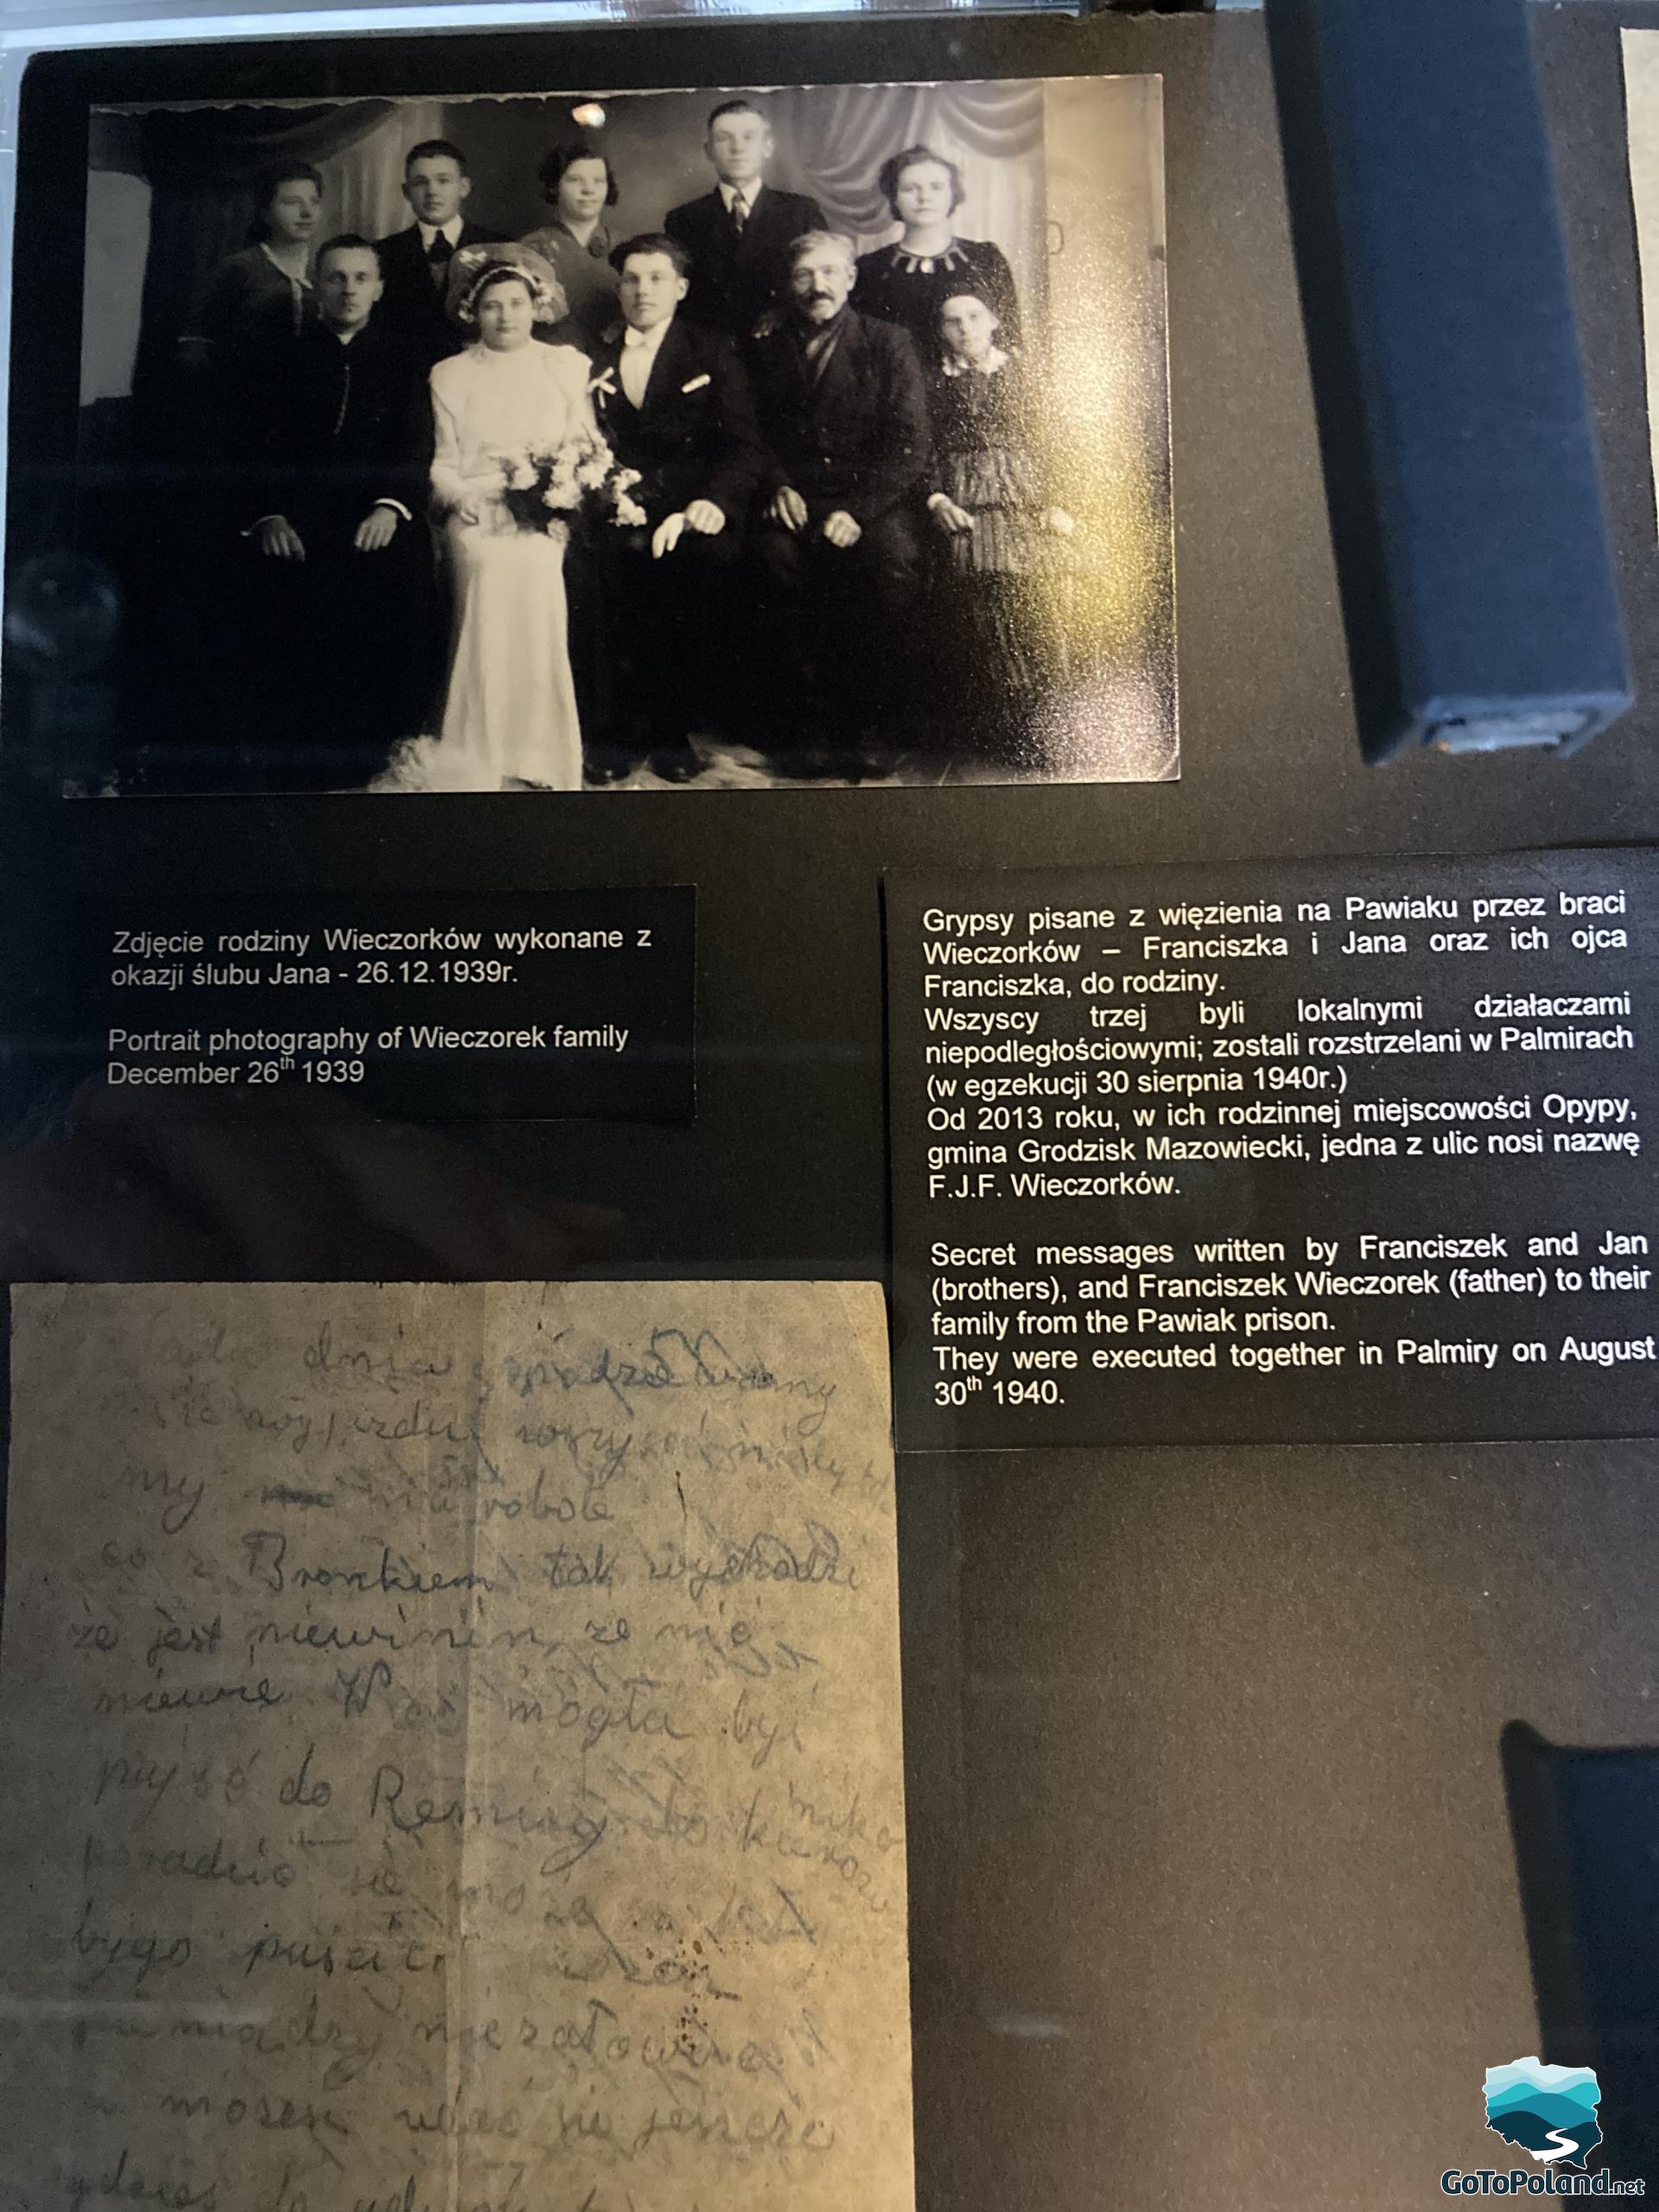 The exhibition in the museum, a small photograph shows the wedding and secret messages written by the brothers to the family from Pawiak prison